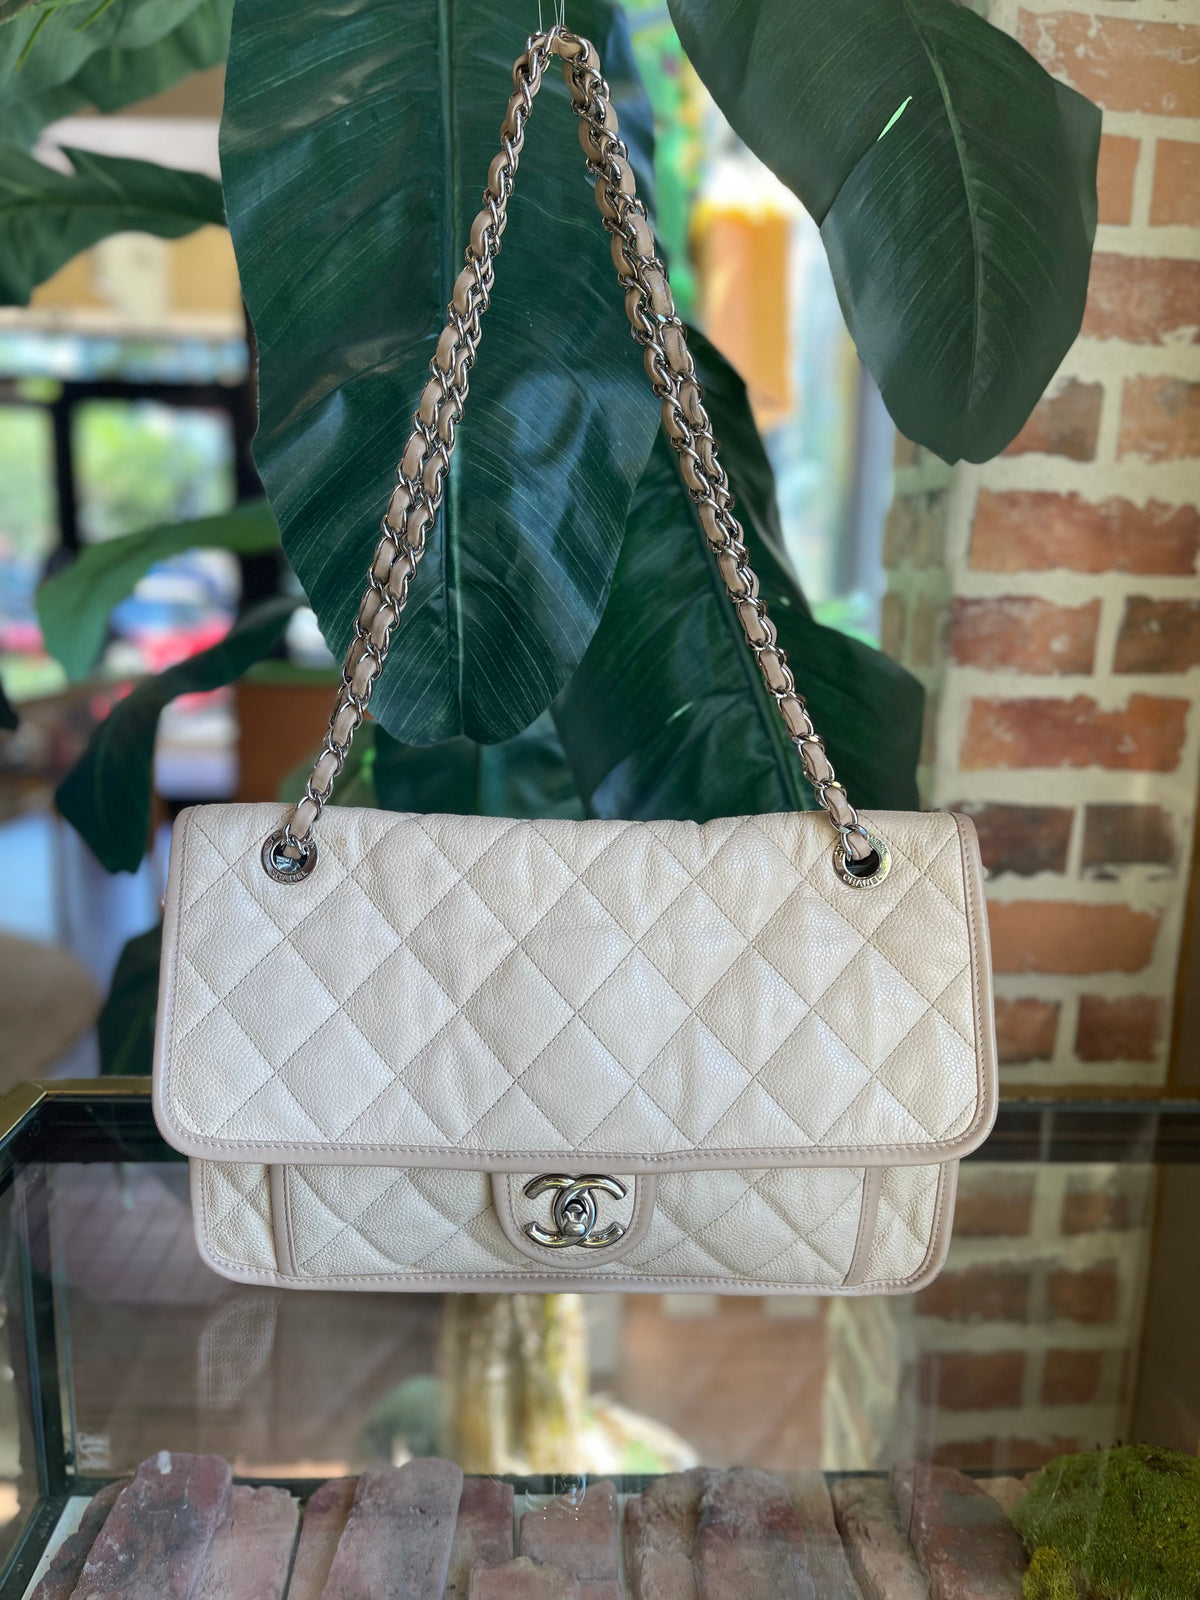 Chanel French Riviera Beige Flap